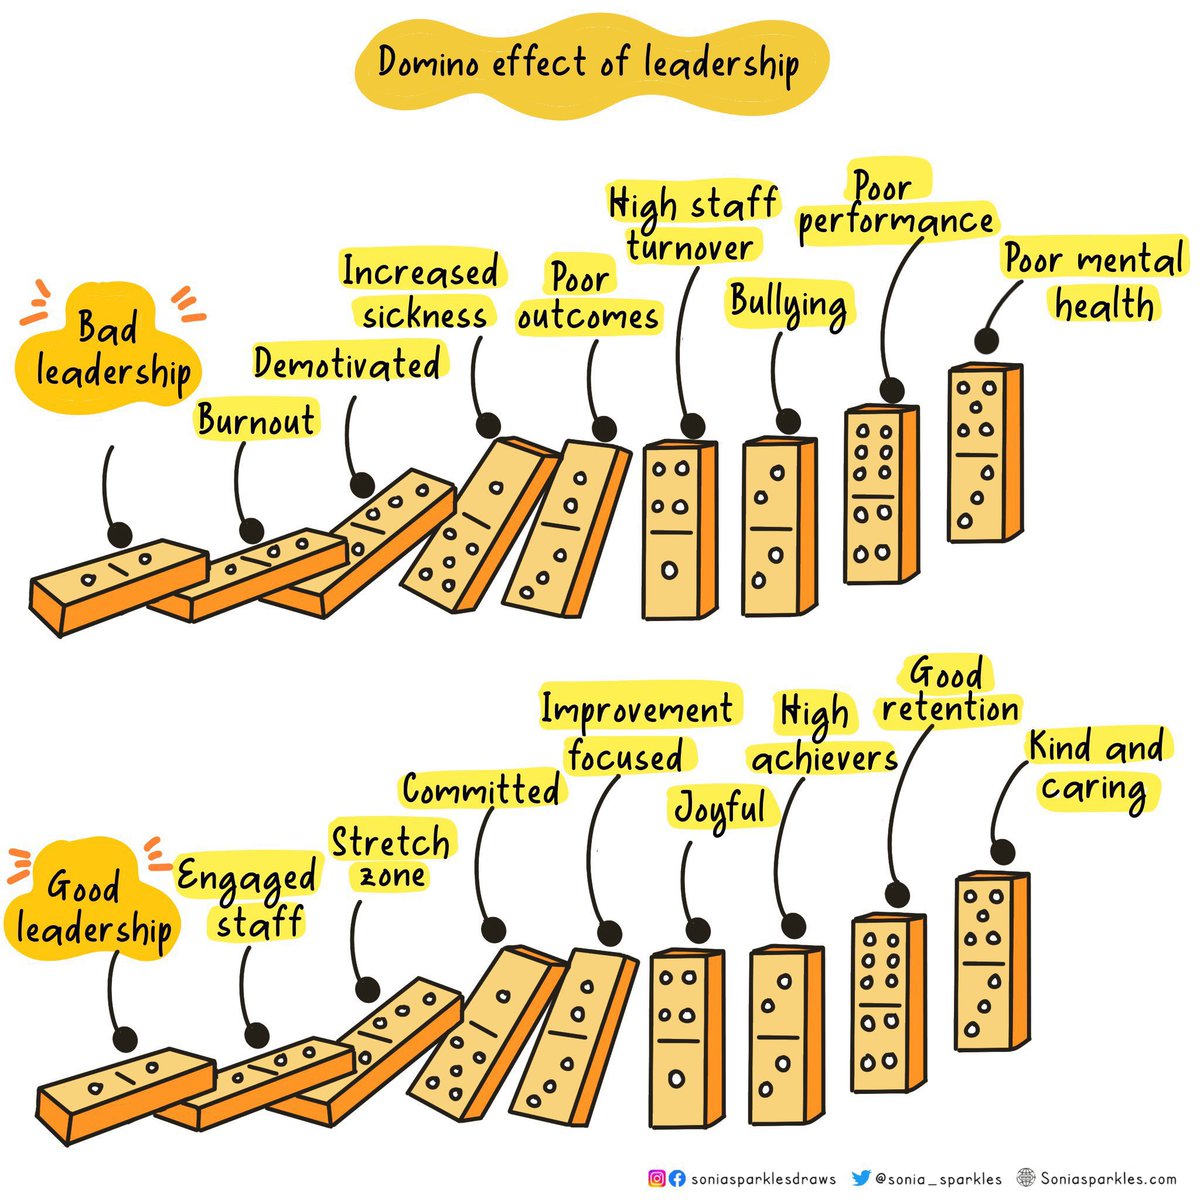 Your leadership, behaviour & approach has a domino effect: